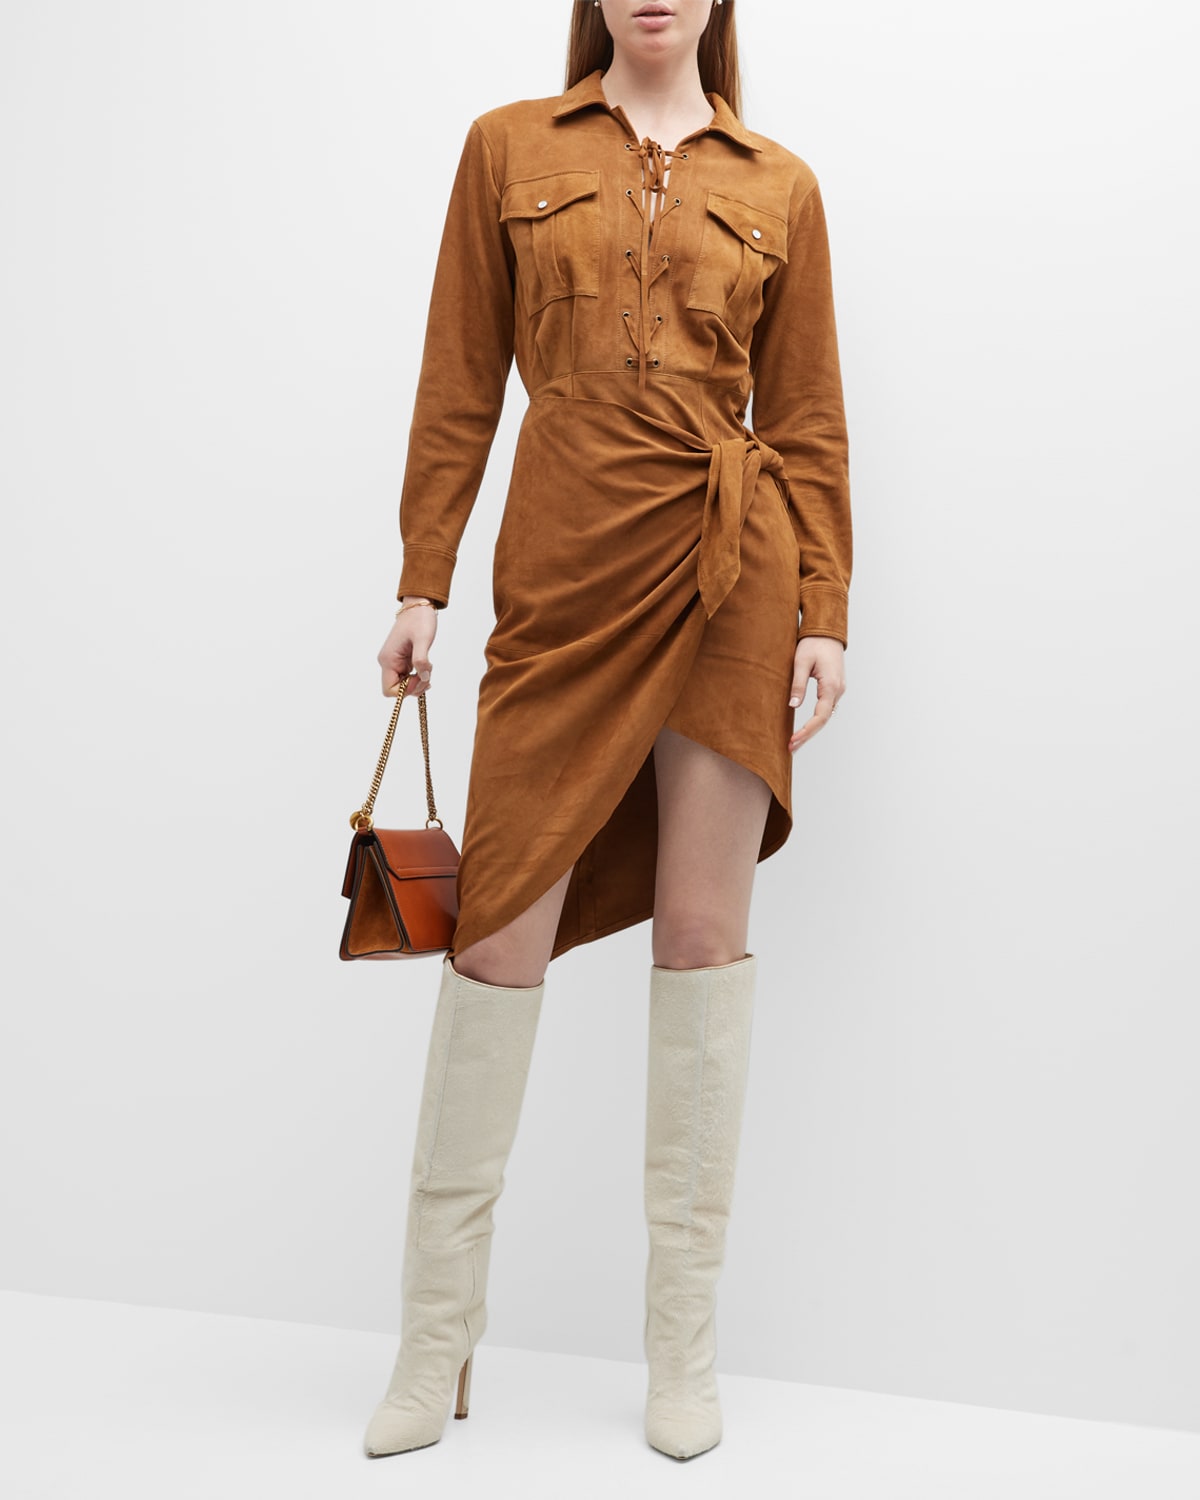 Willa Lace-Up Suede Wrap Shirtdress